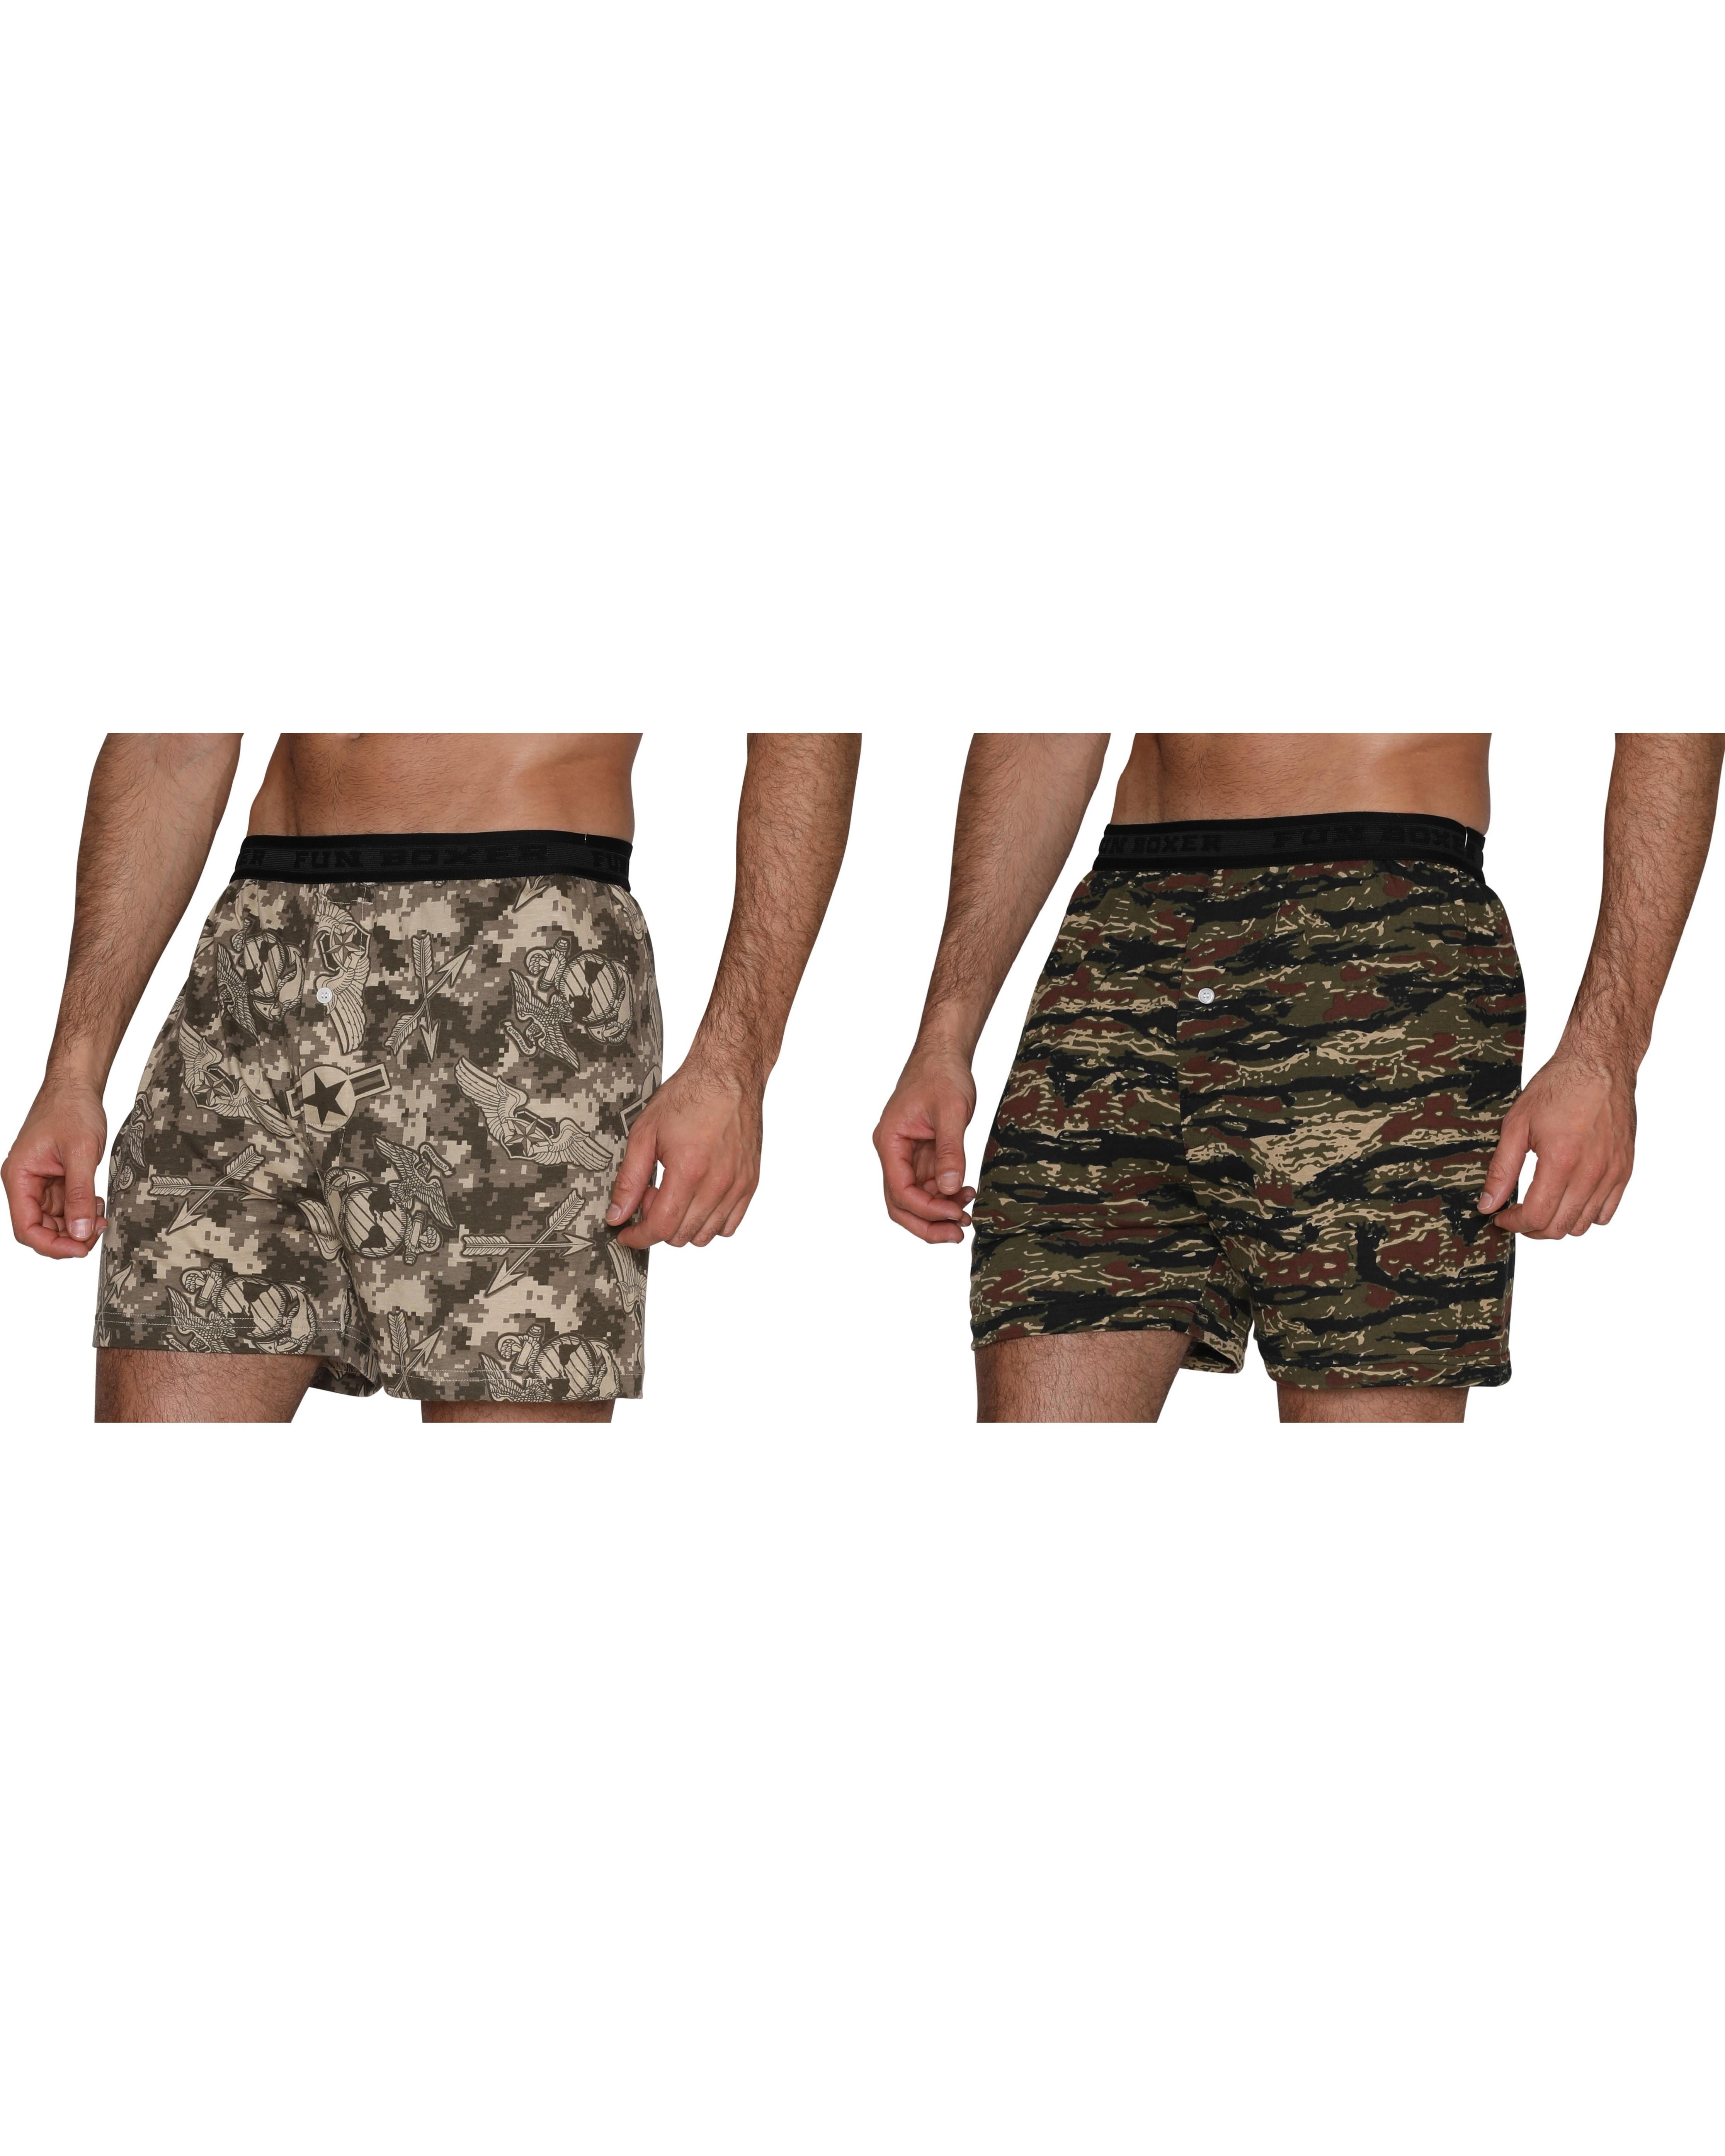 3 Pairs Mens Camouflage Camo Army Boxer Shorts Briefs Adults Underwear S,M,L,X-L 